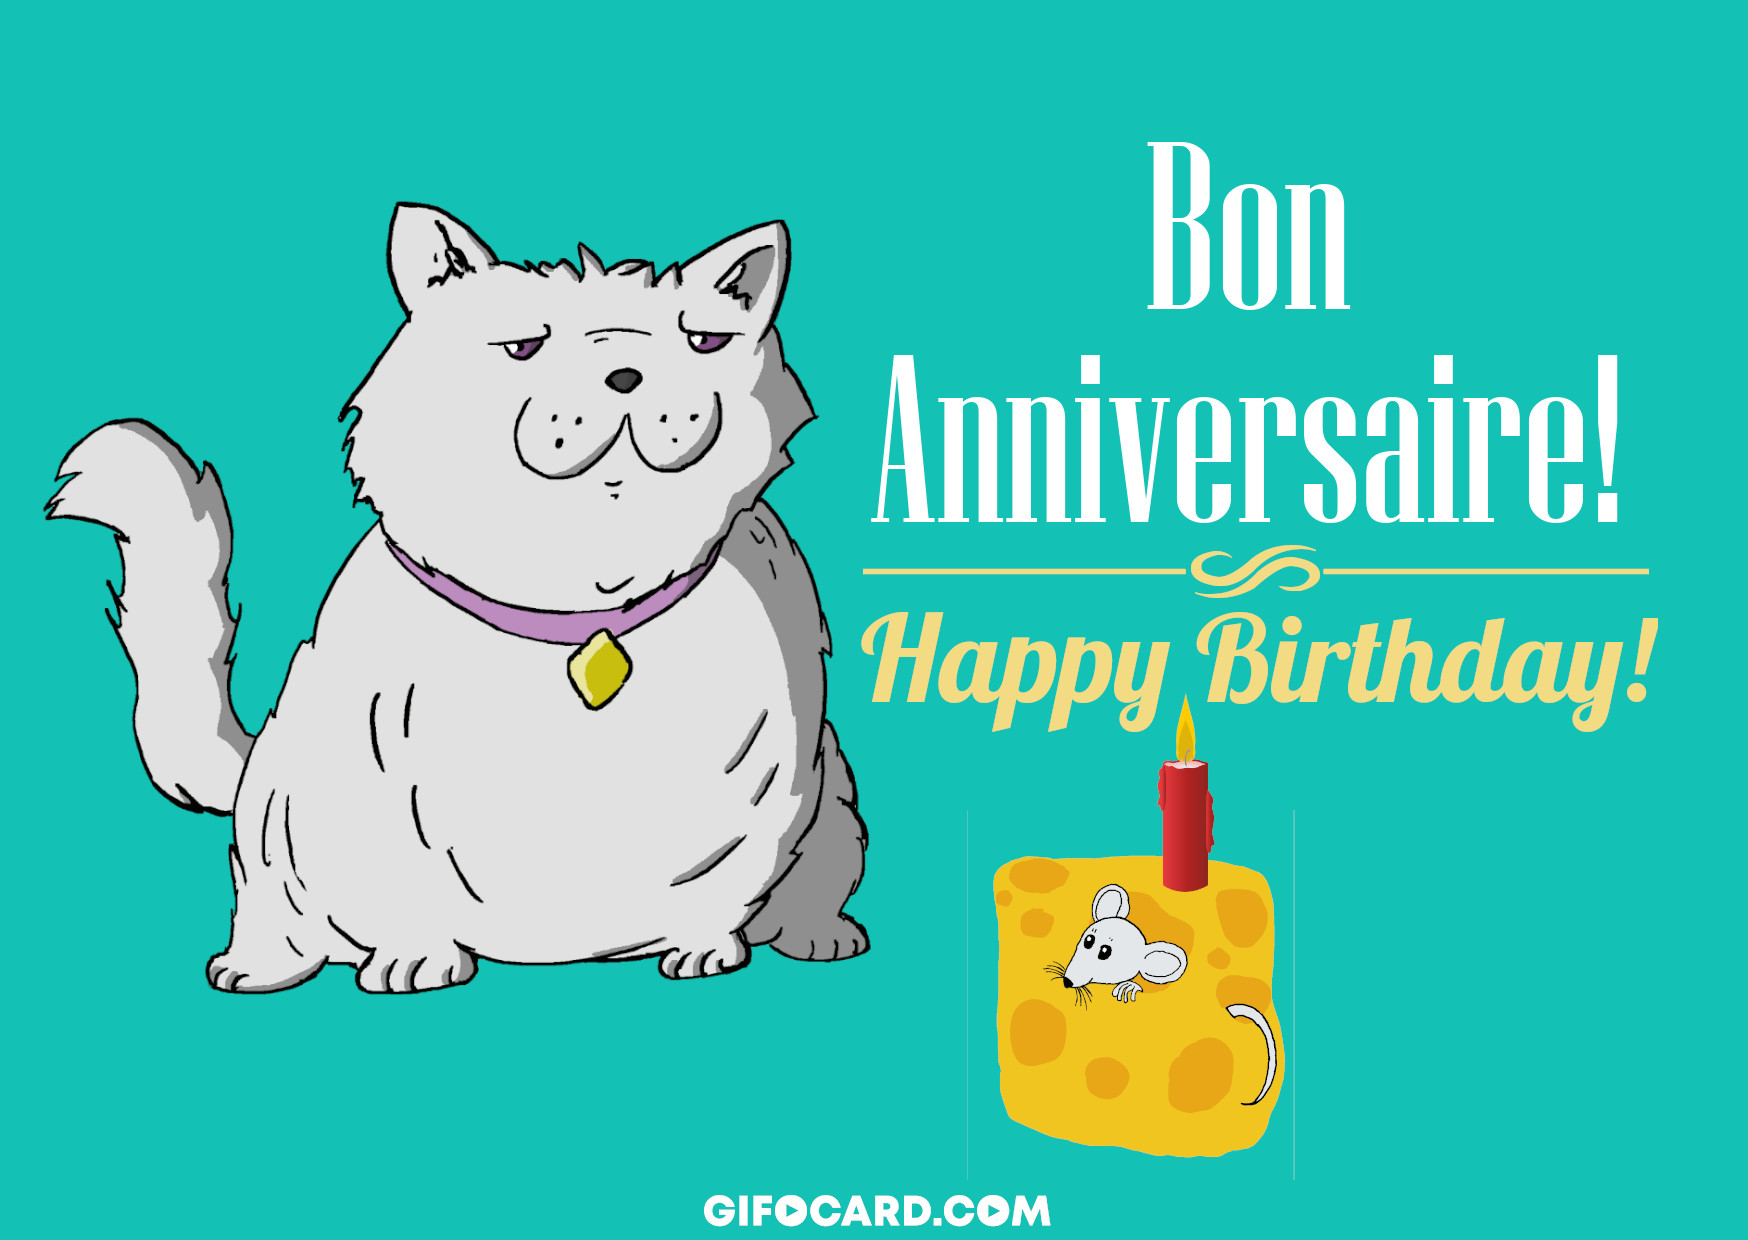 birthday-animated-gif-image-download-facebook-whatsapp-text-email